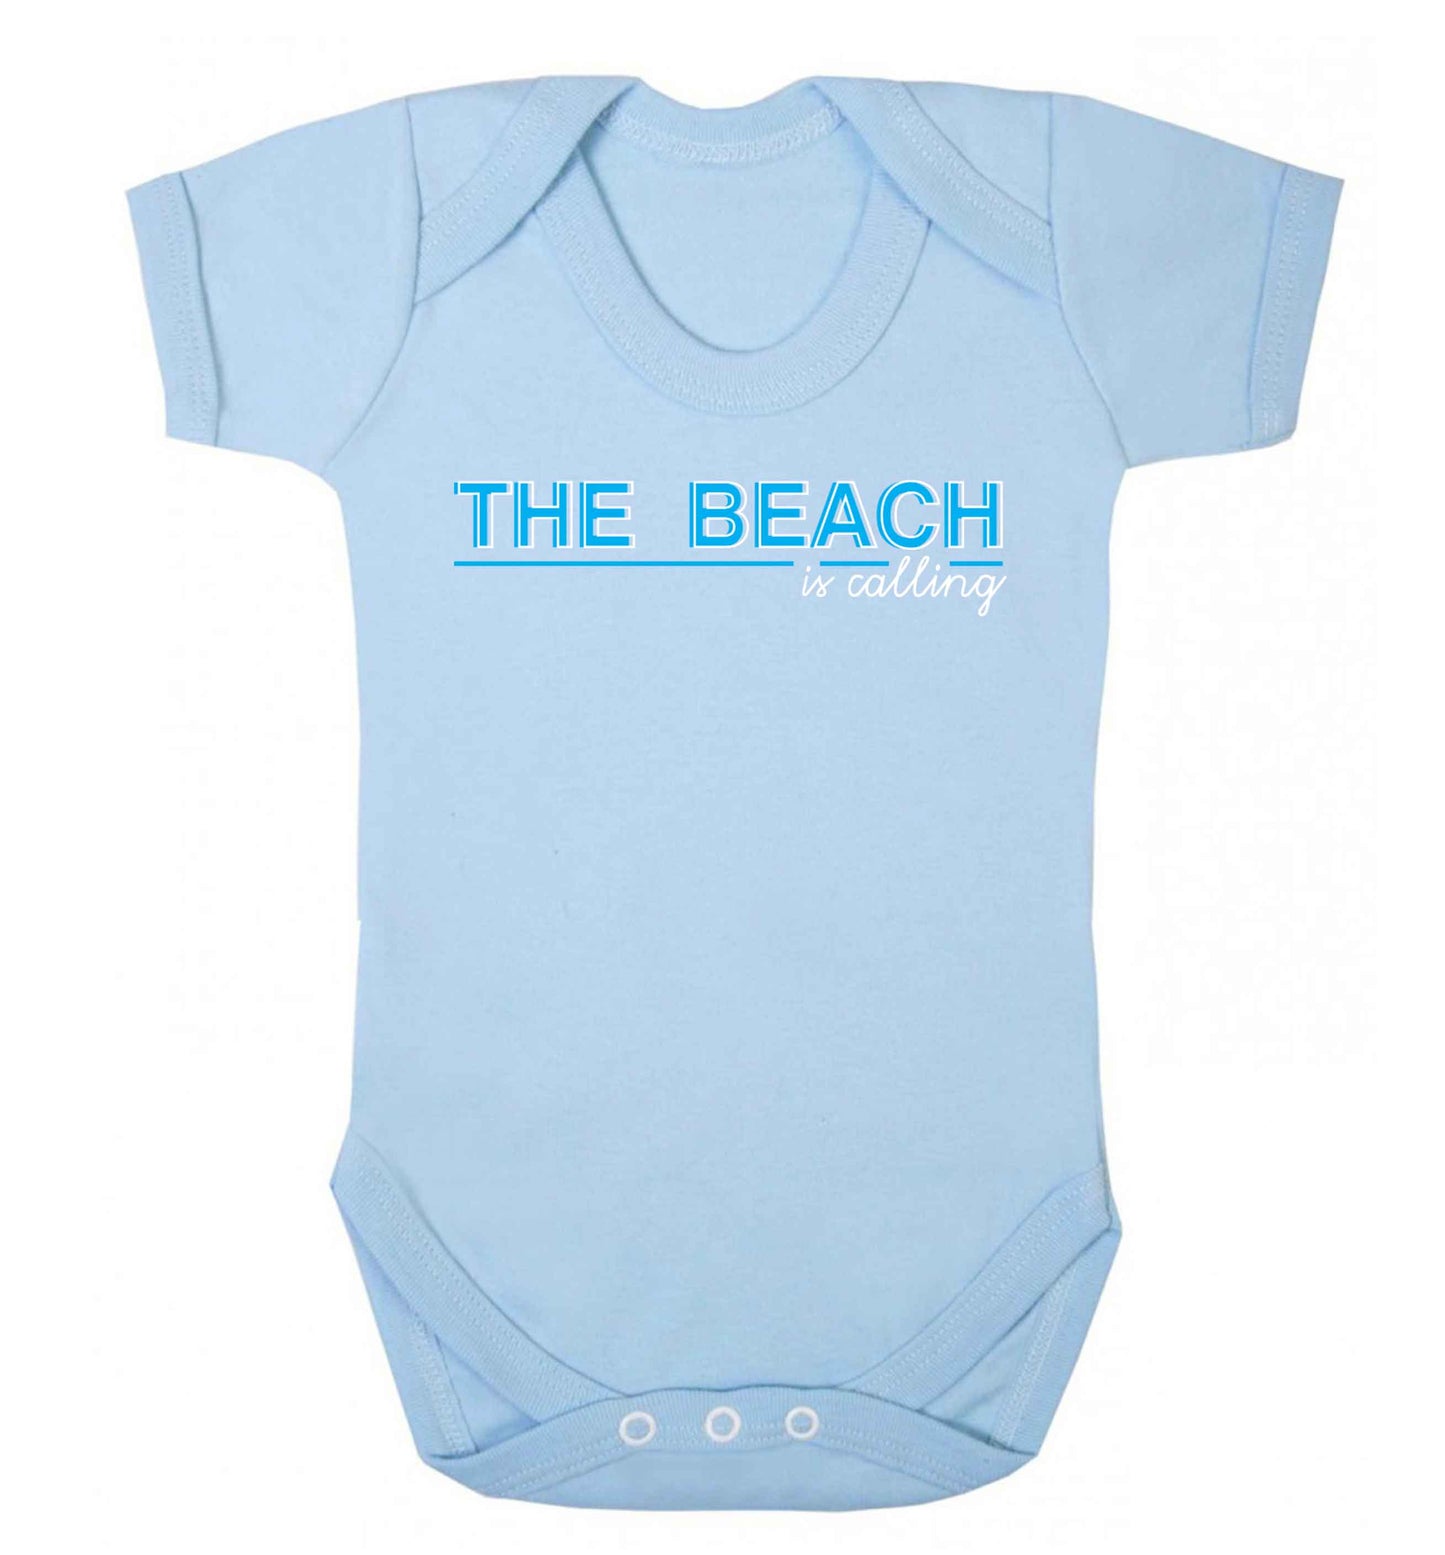 The beach is calling Baby Vest pale blue 18-24 months